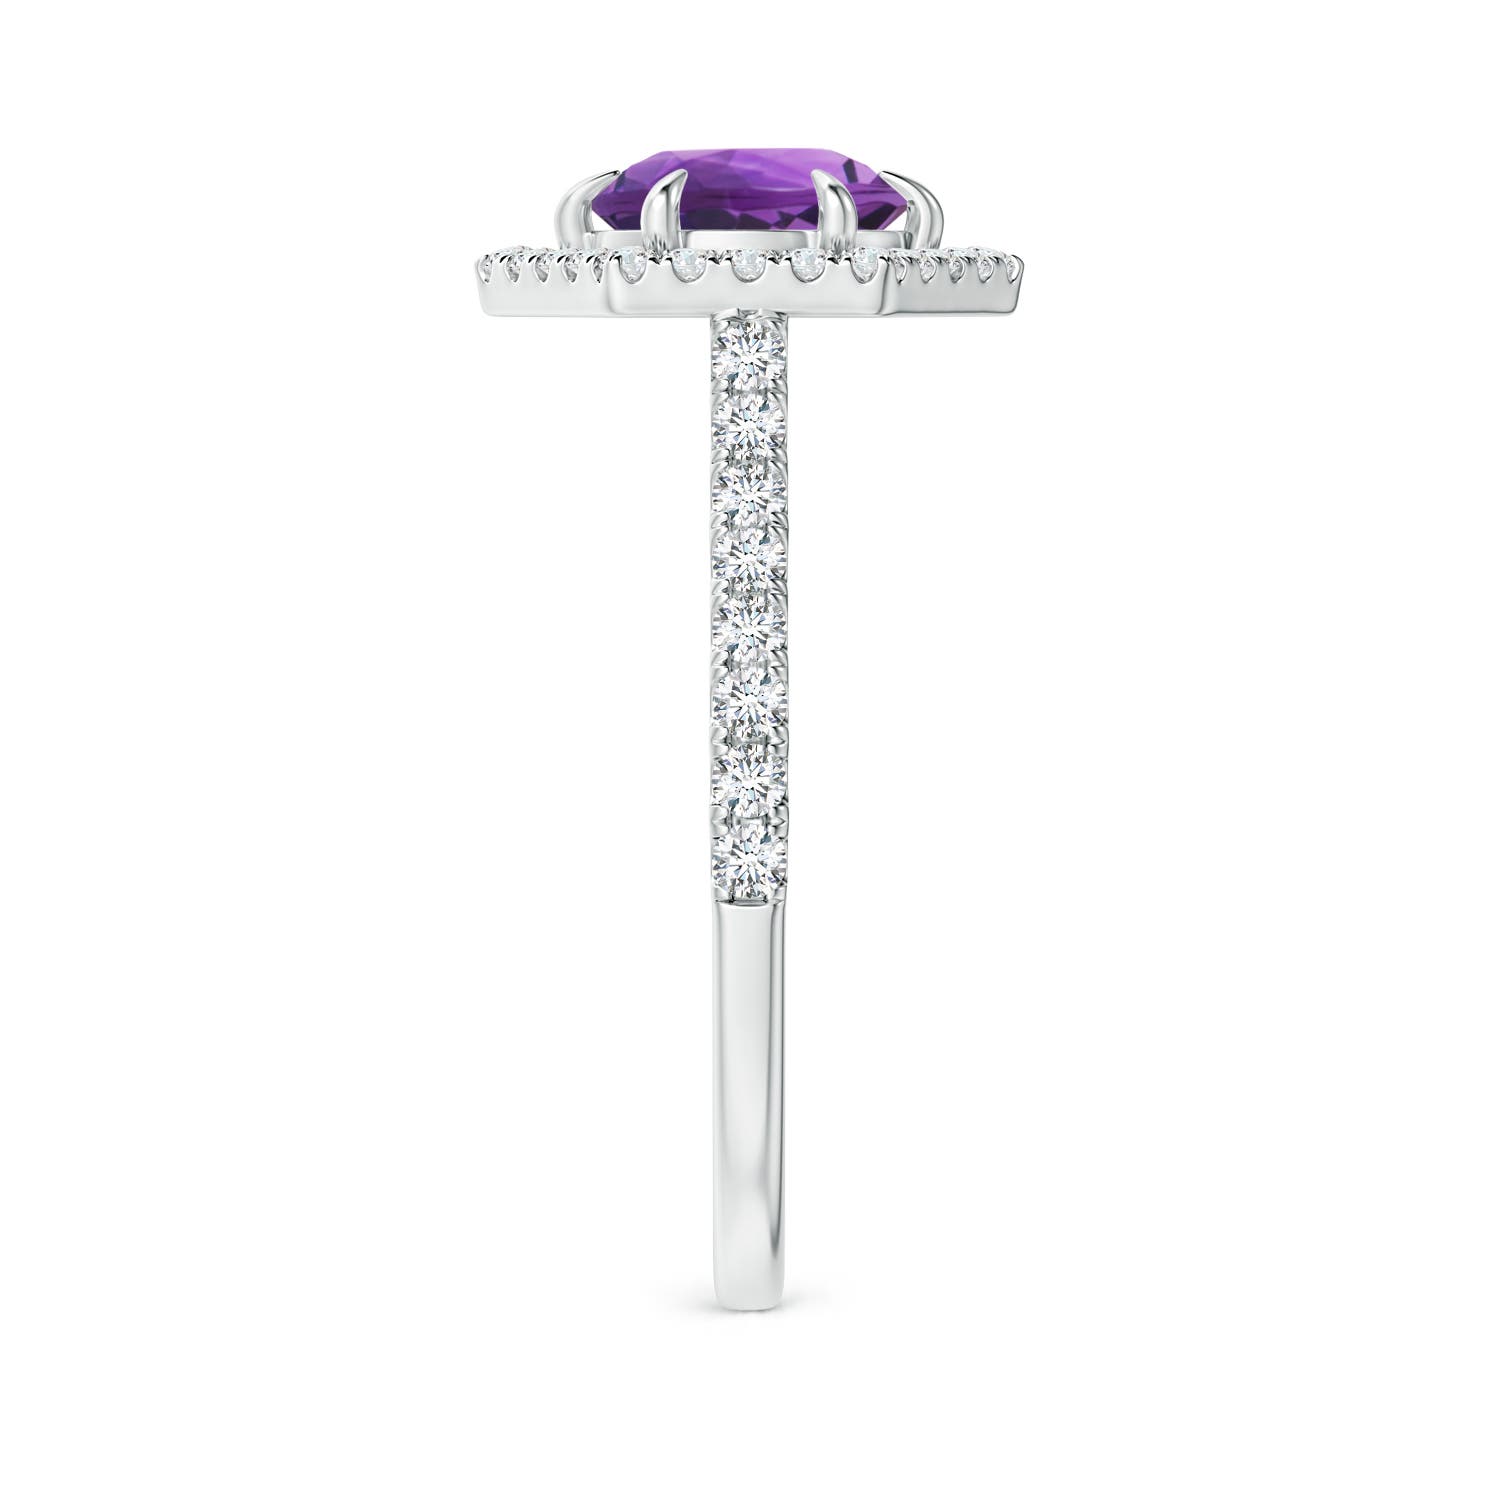 AAA - Amethyst / 1.57 CT / 14 KT White Gold